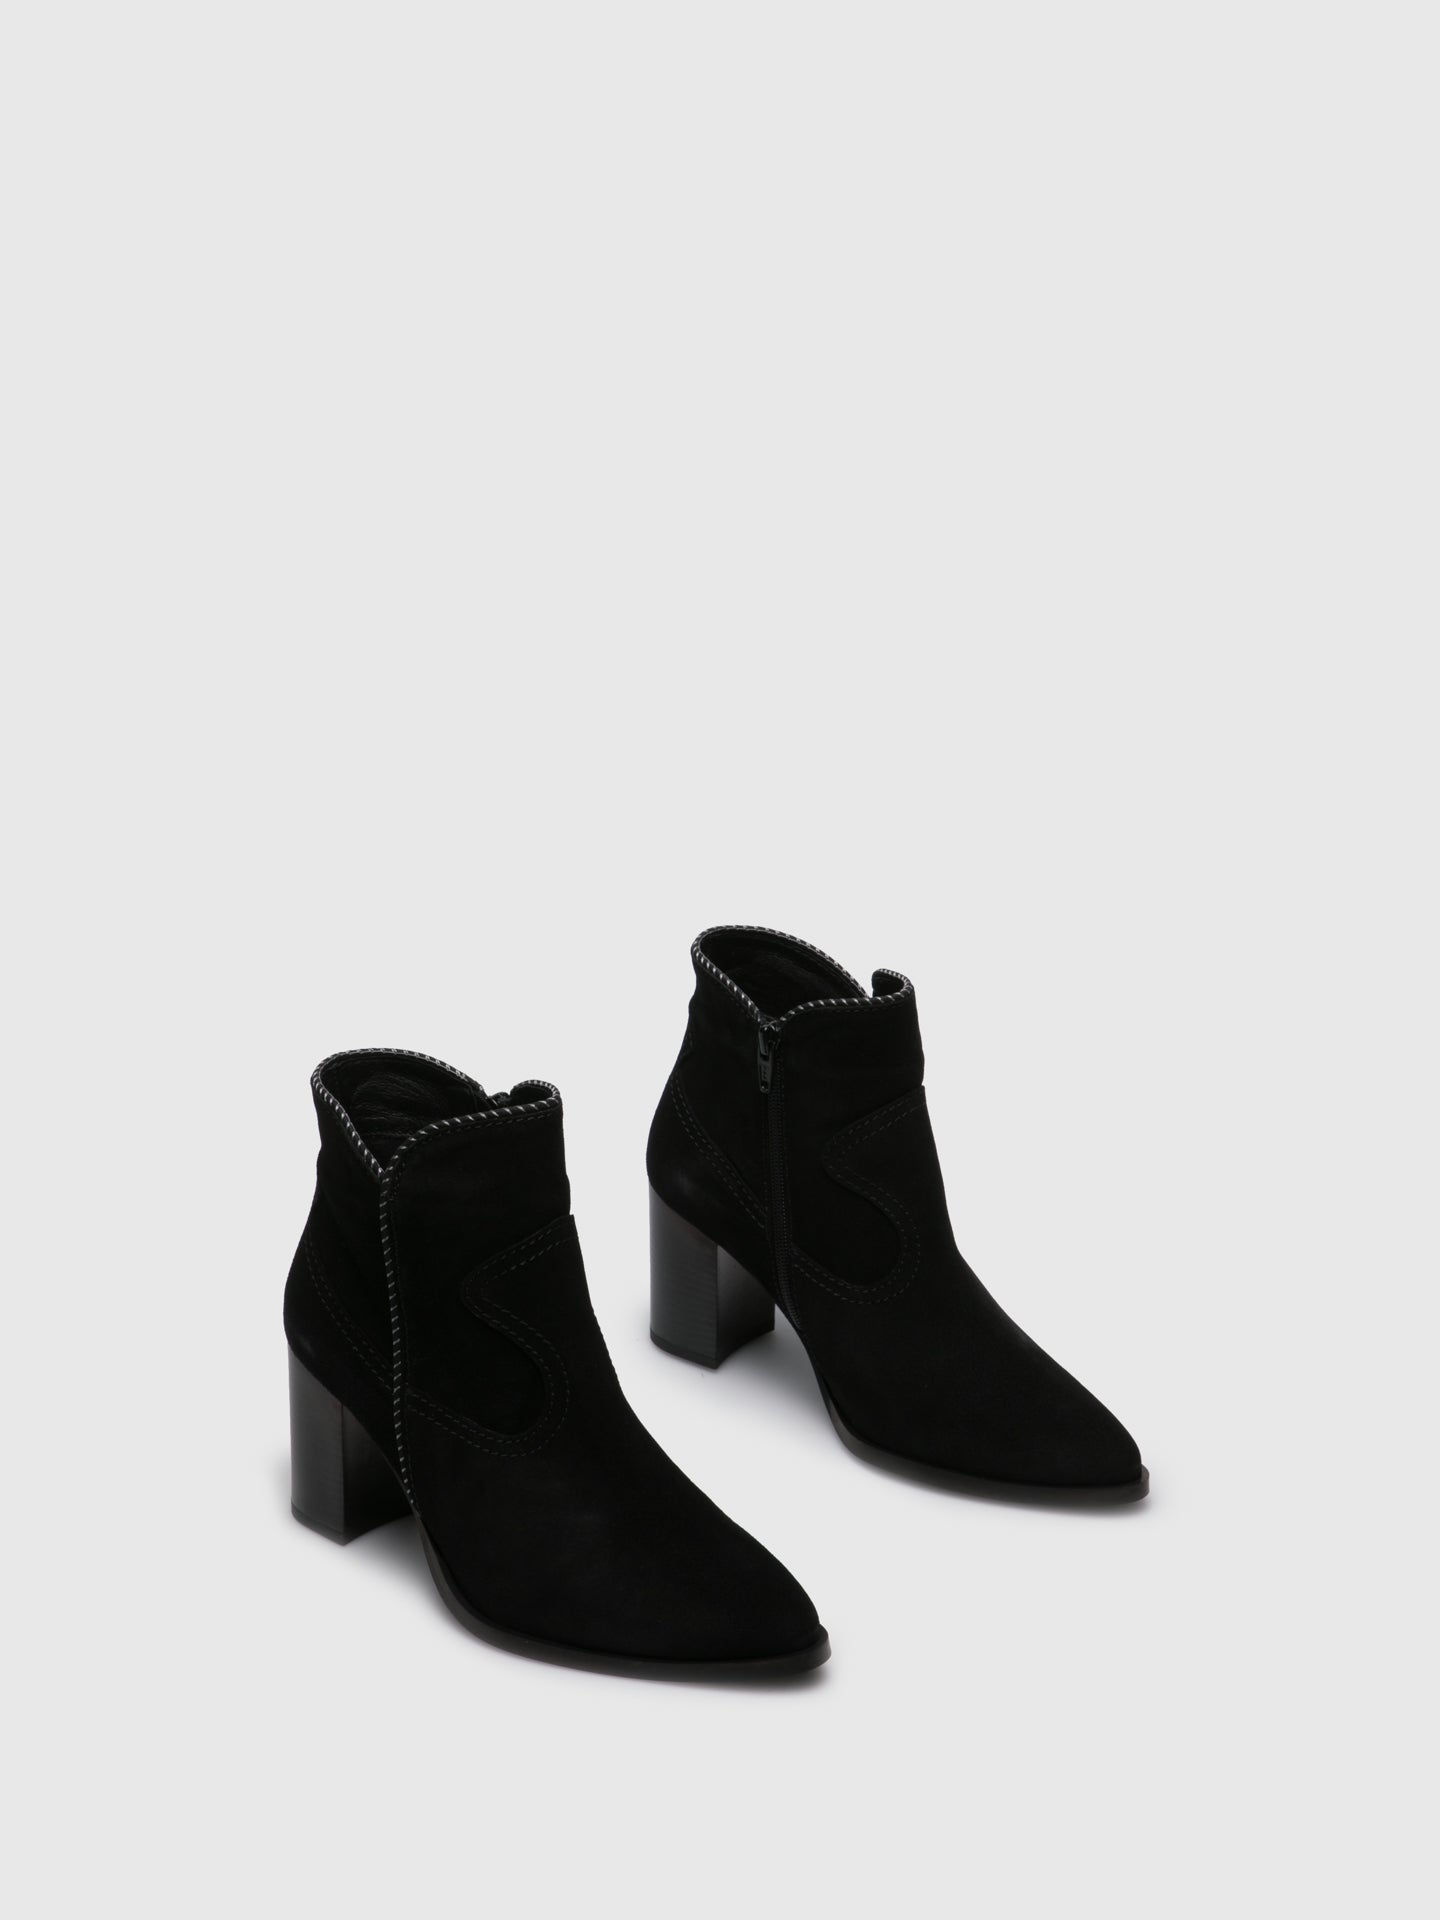 Foreva Black Pointed Toe Ankle Boots